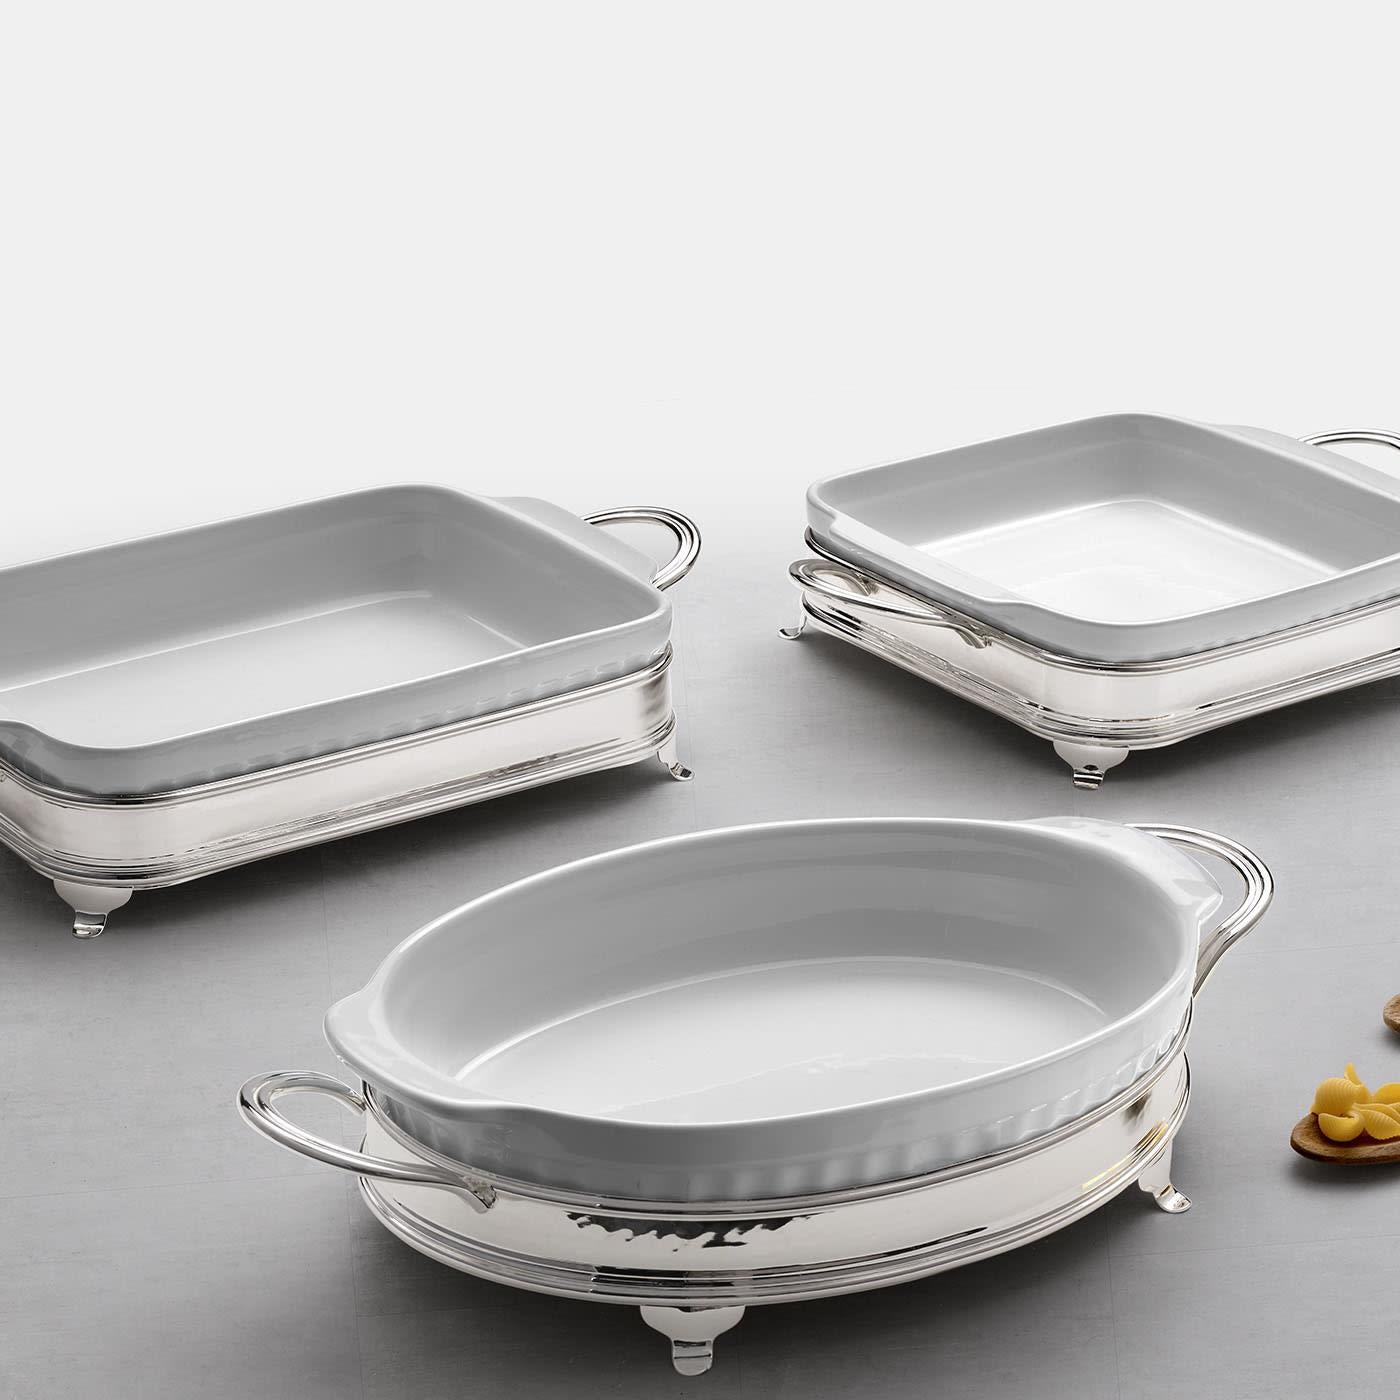 Elegance and luxury define this tableware set comprised of a rectangular white ceramic baking dish and a specific silver-plated brass holder with handles. Showcasing a gleaming finish, the holder comes complete with tiny feet allowing for the baking